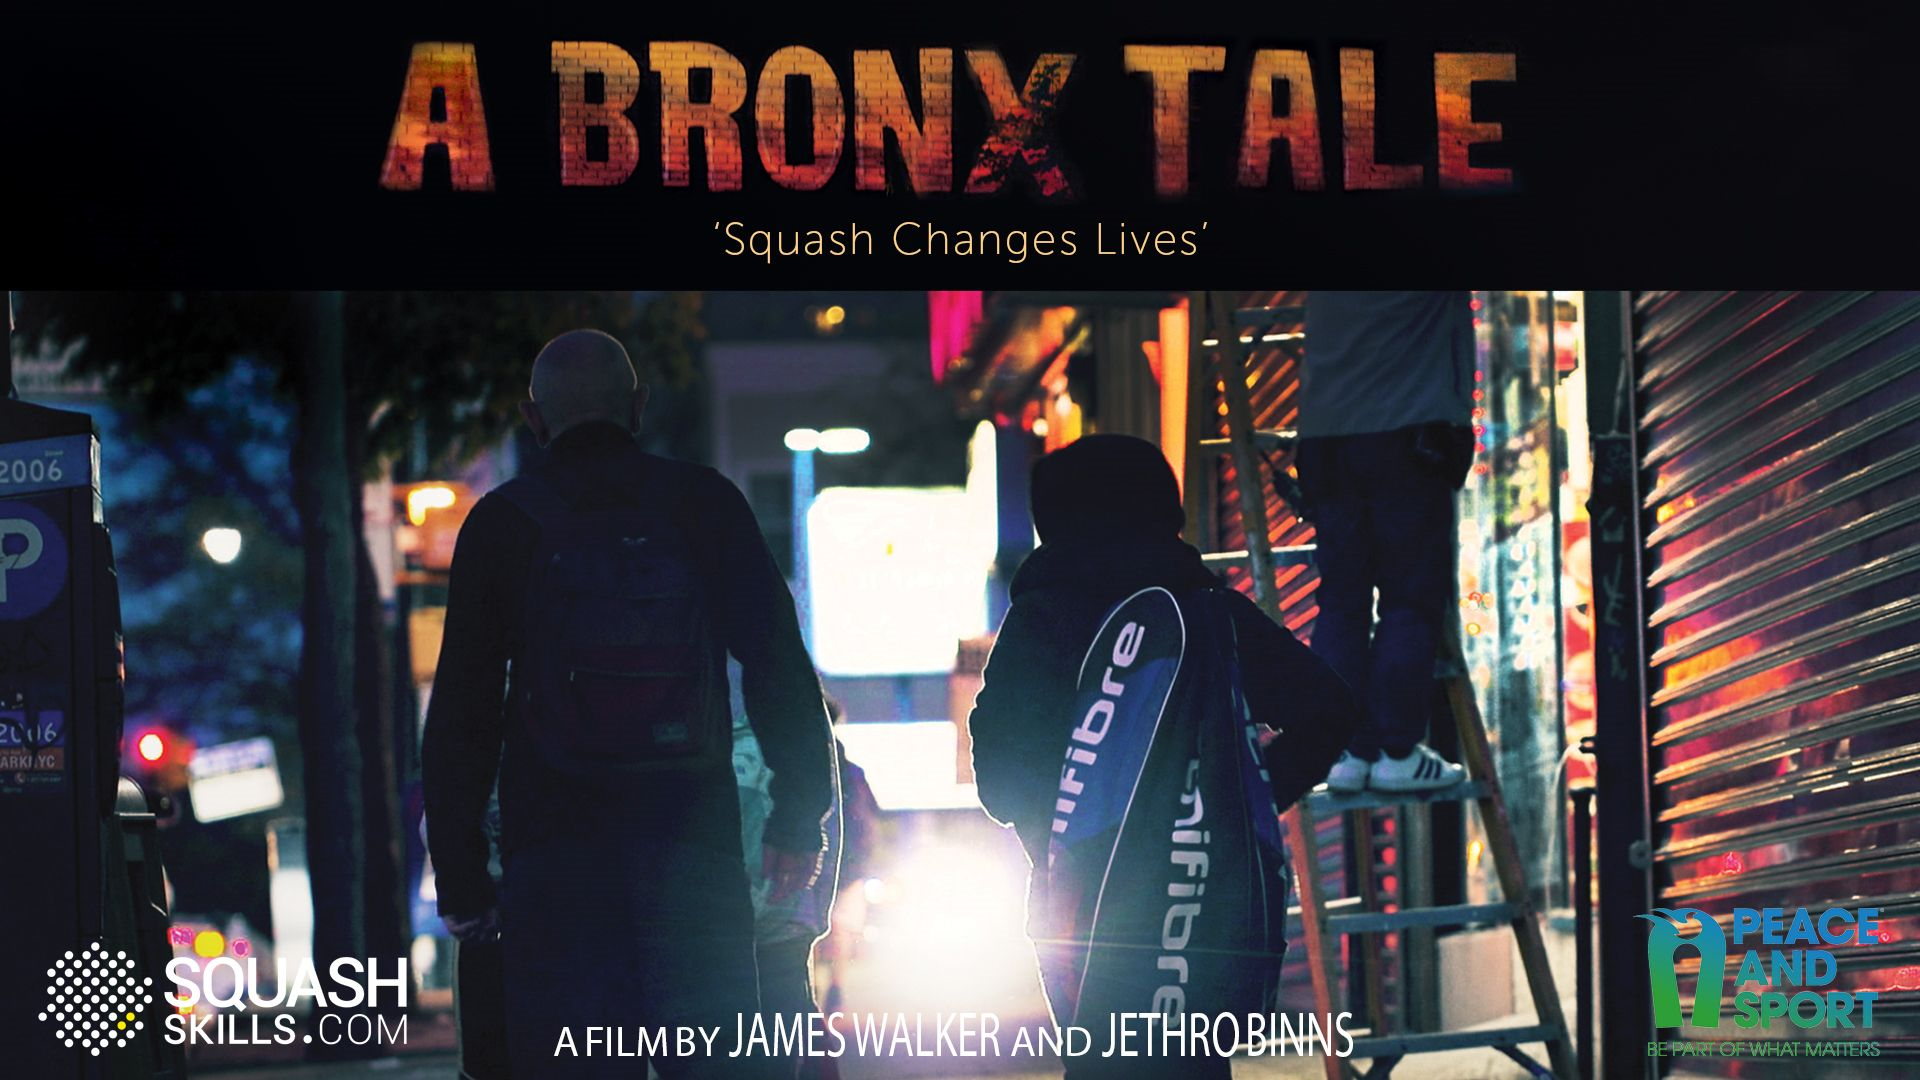 A Bronx Tale has been nominated for a Peace and Sport award ©WSF